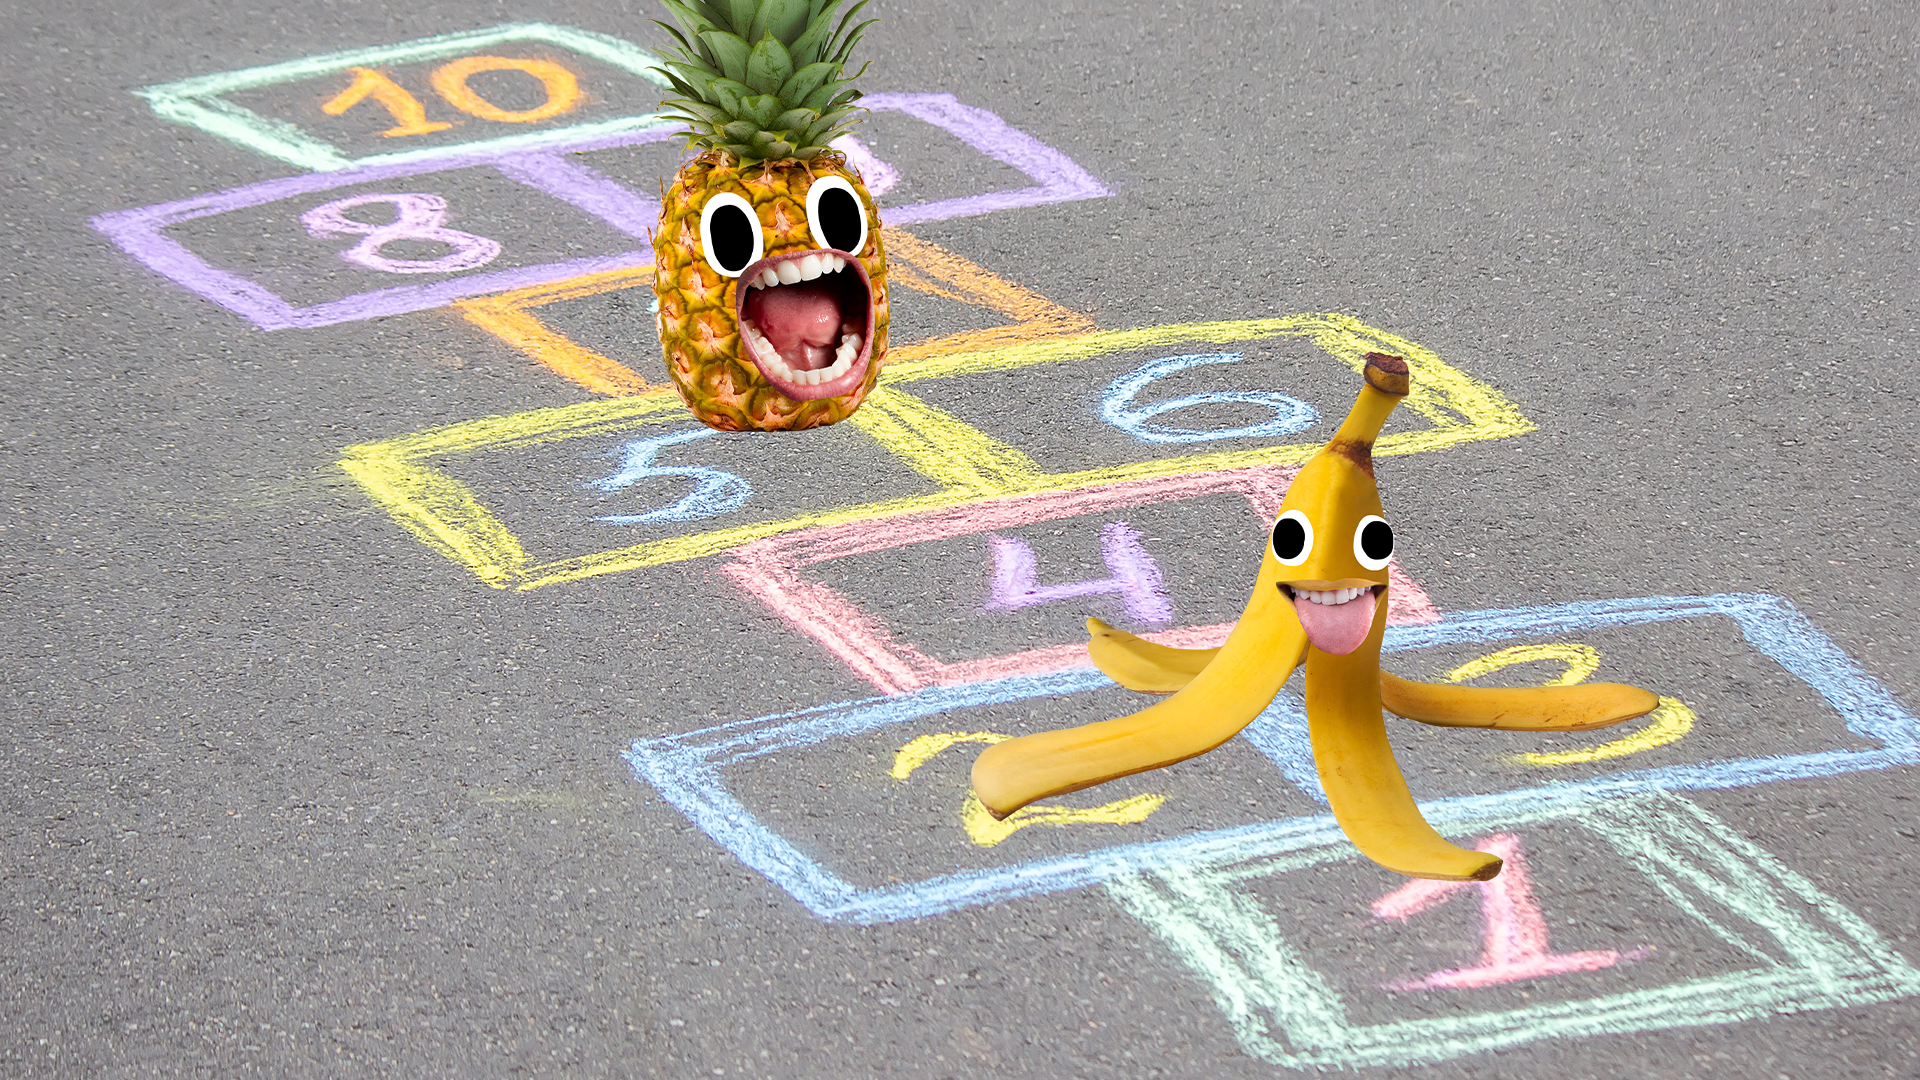 Pineapple and banana on hopscotch squares